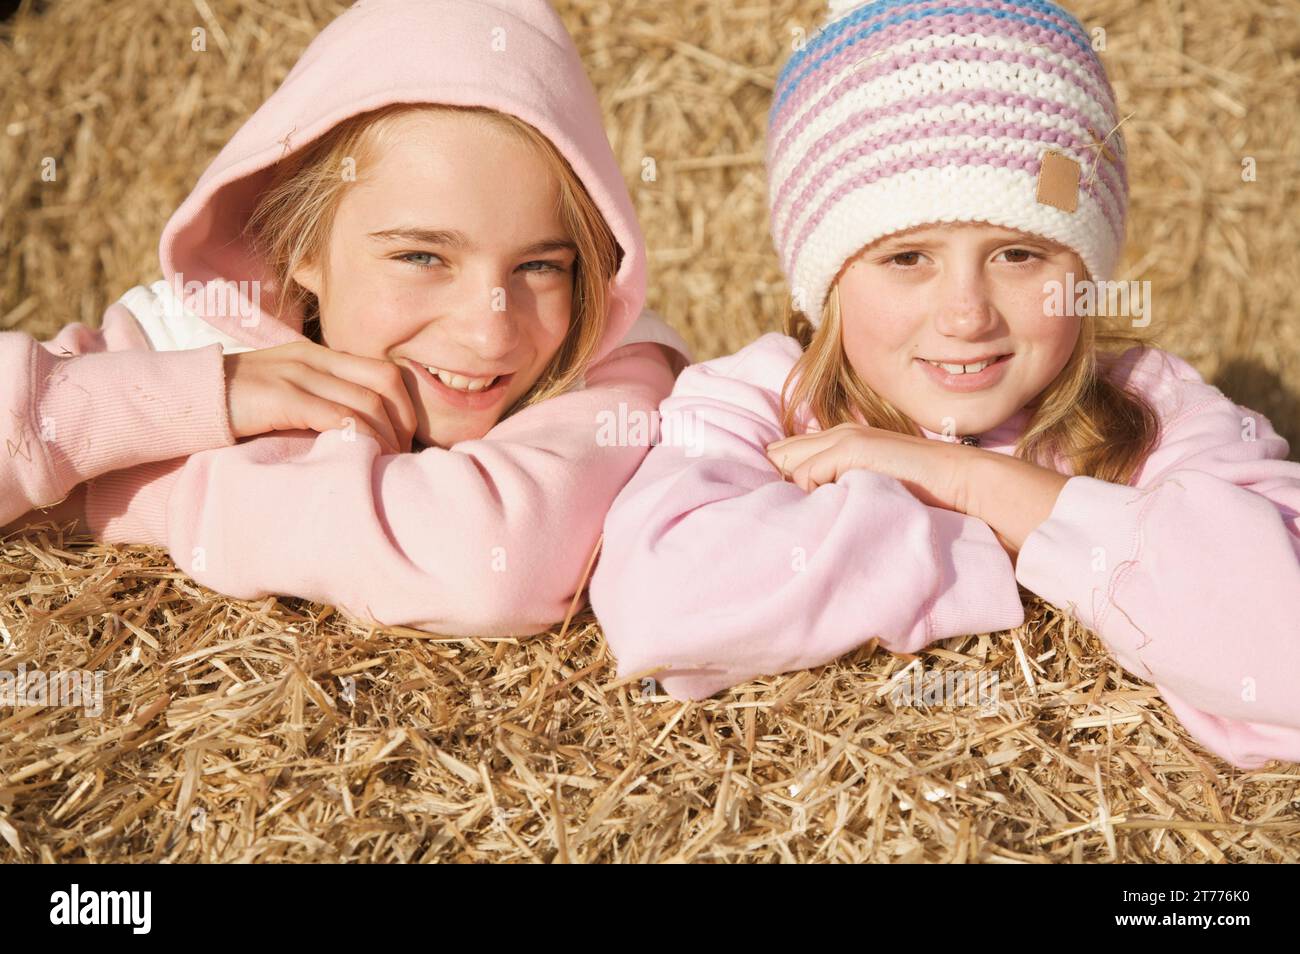 Two young girls leaning on bale of hay smiling Stock Photo